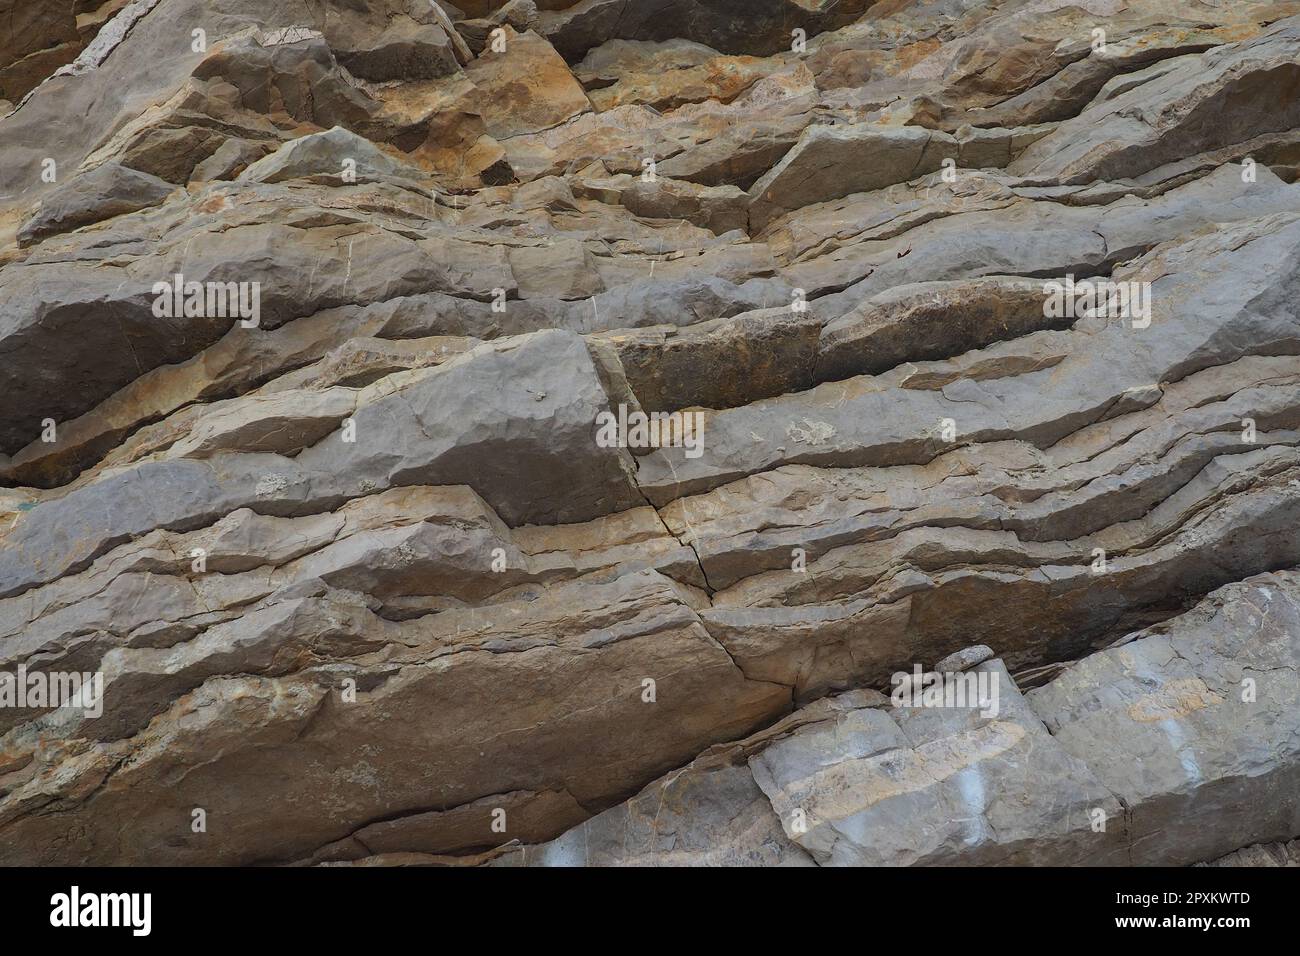 Flysch is a series of marine sedimentary rocks that are predominantly clastic in origin and are characterized by the alternation of several lithologic Stock Photo